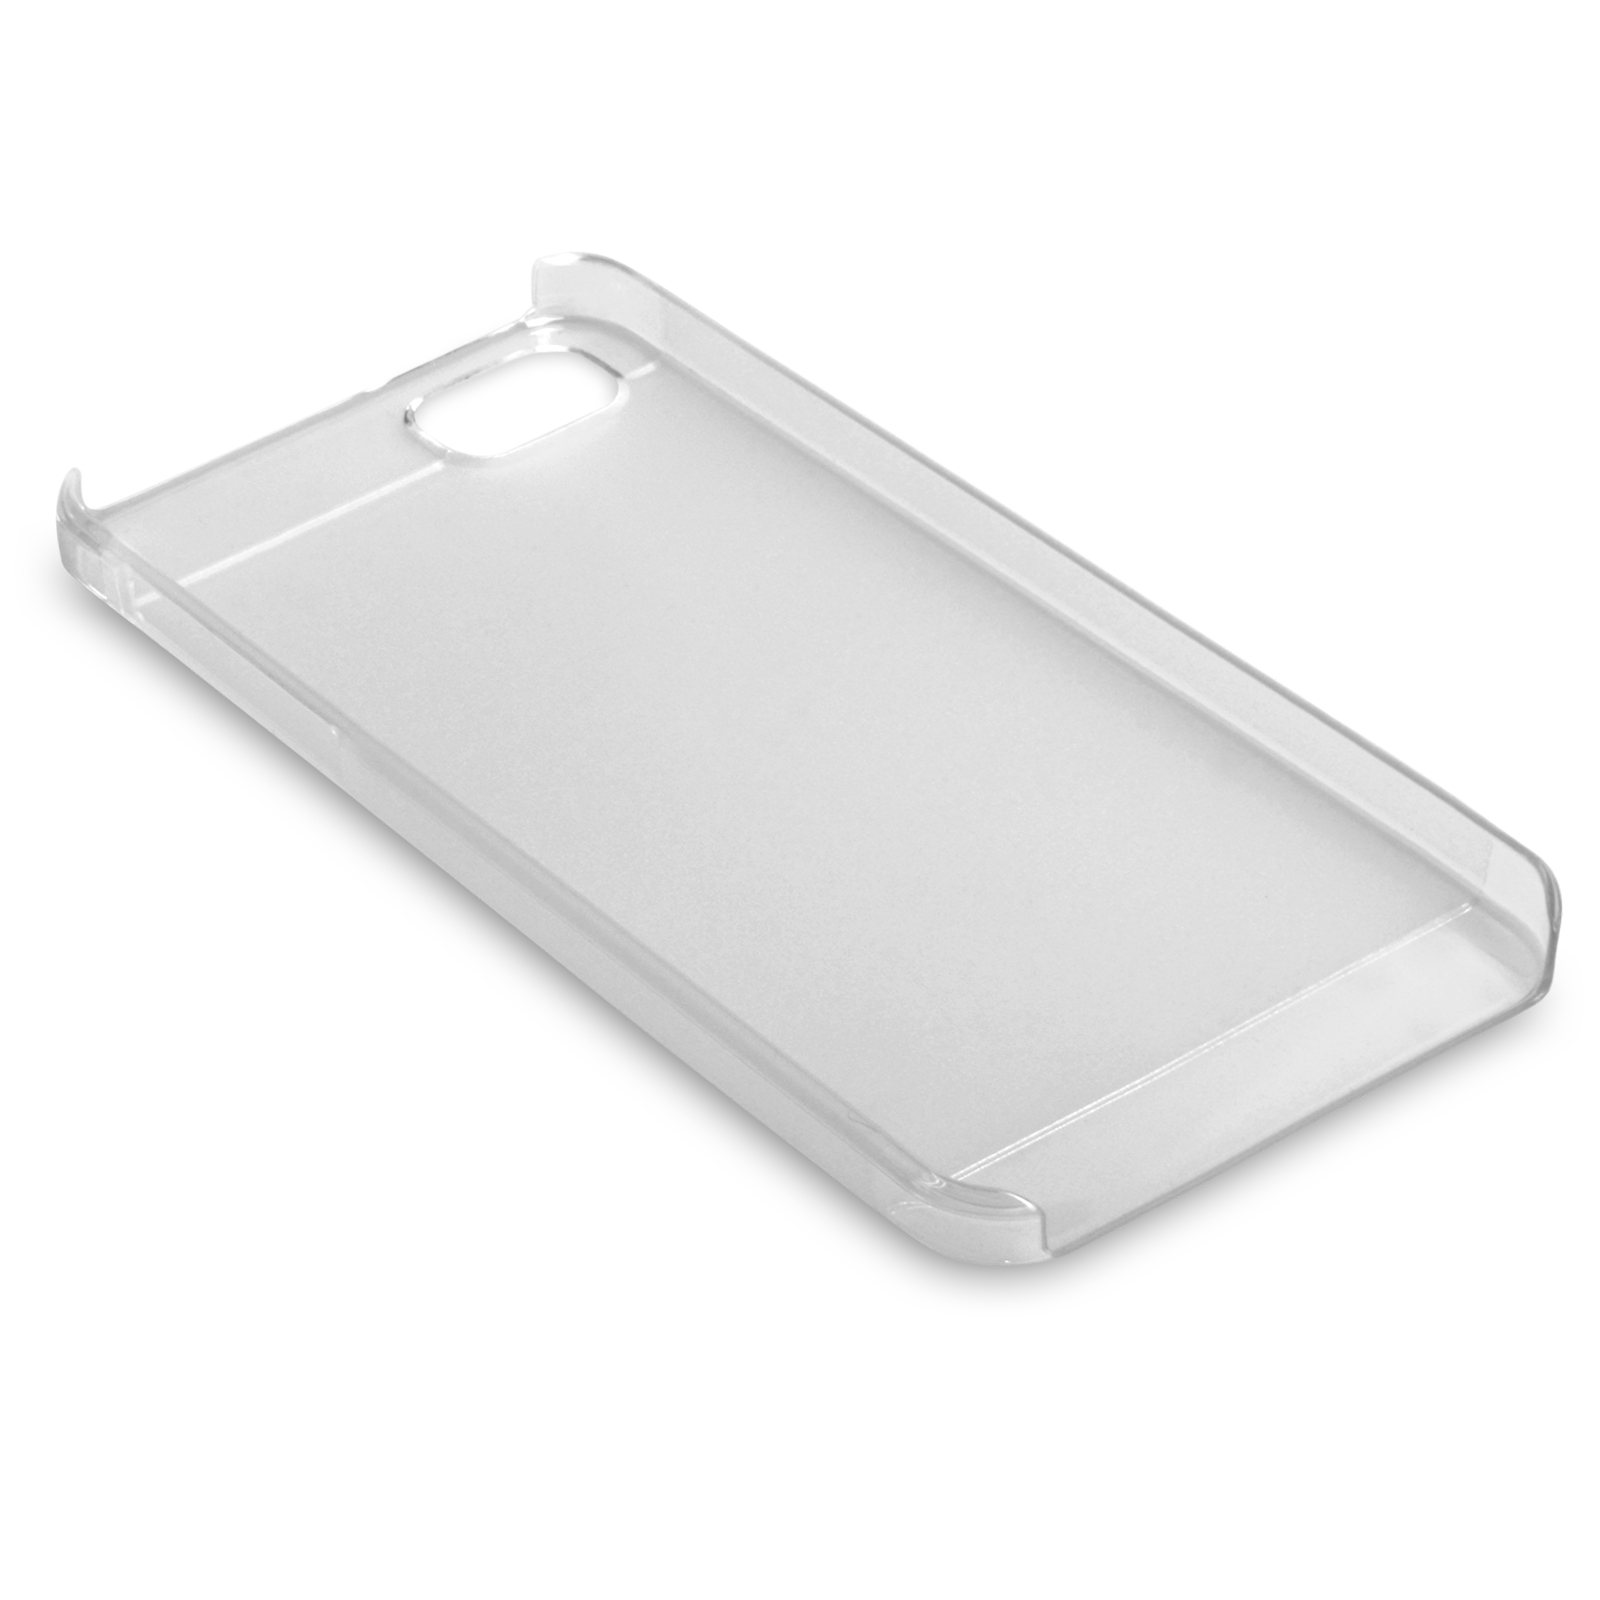 YouSave Accessories iPhone 5 / 5S Hard Case - Clear-Matte